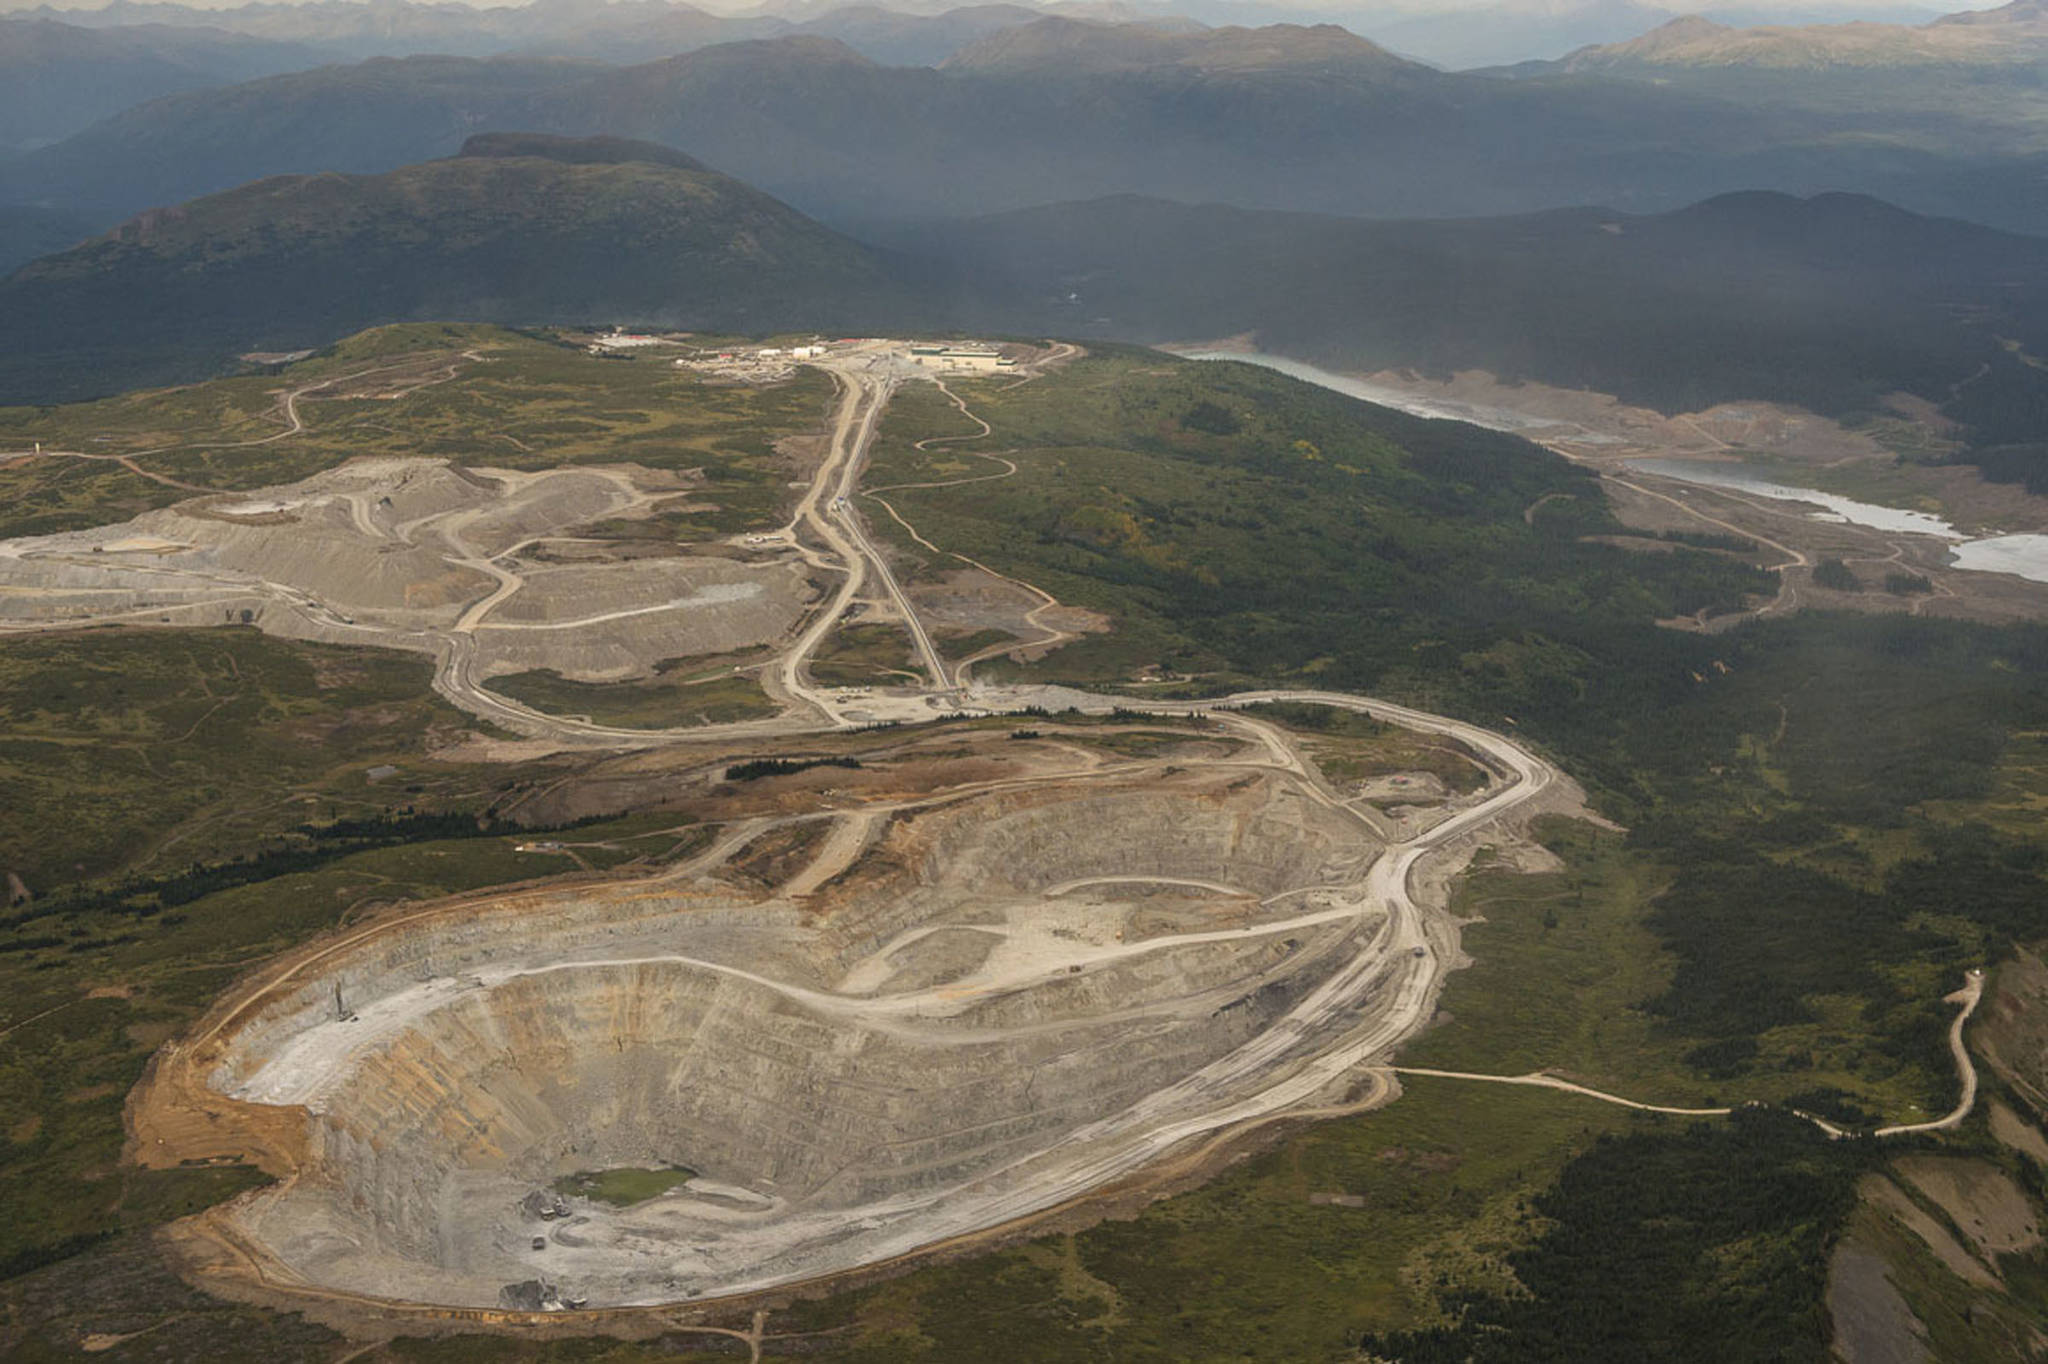 The Red Chris, a gold and copper mine, began to operate in late 2014, shortly after the Mount Polley tailings dam disaster. The same company, Imperial Metals, owns both mines. (Courtesy Photo | Garth Lenz via Salmon State)